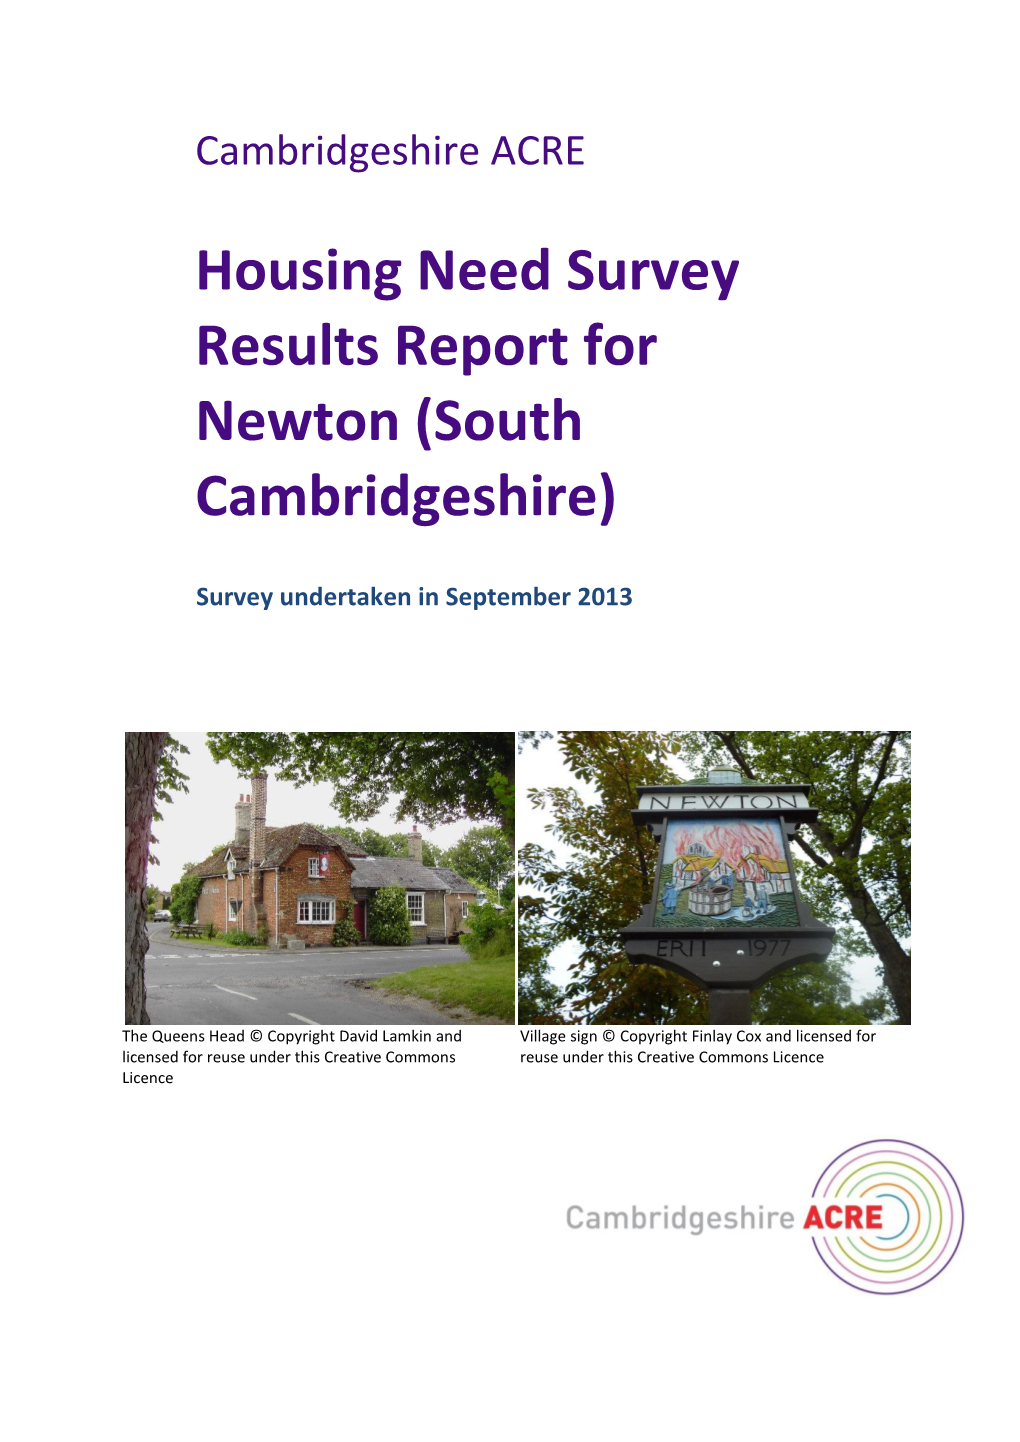 Housing Need Survey Results Report for Newton (South Cambridgeshire)